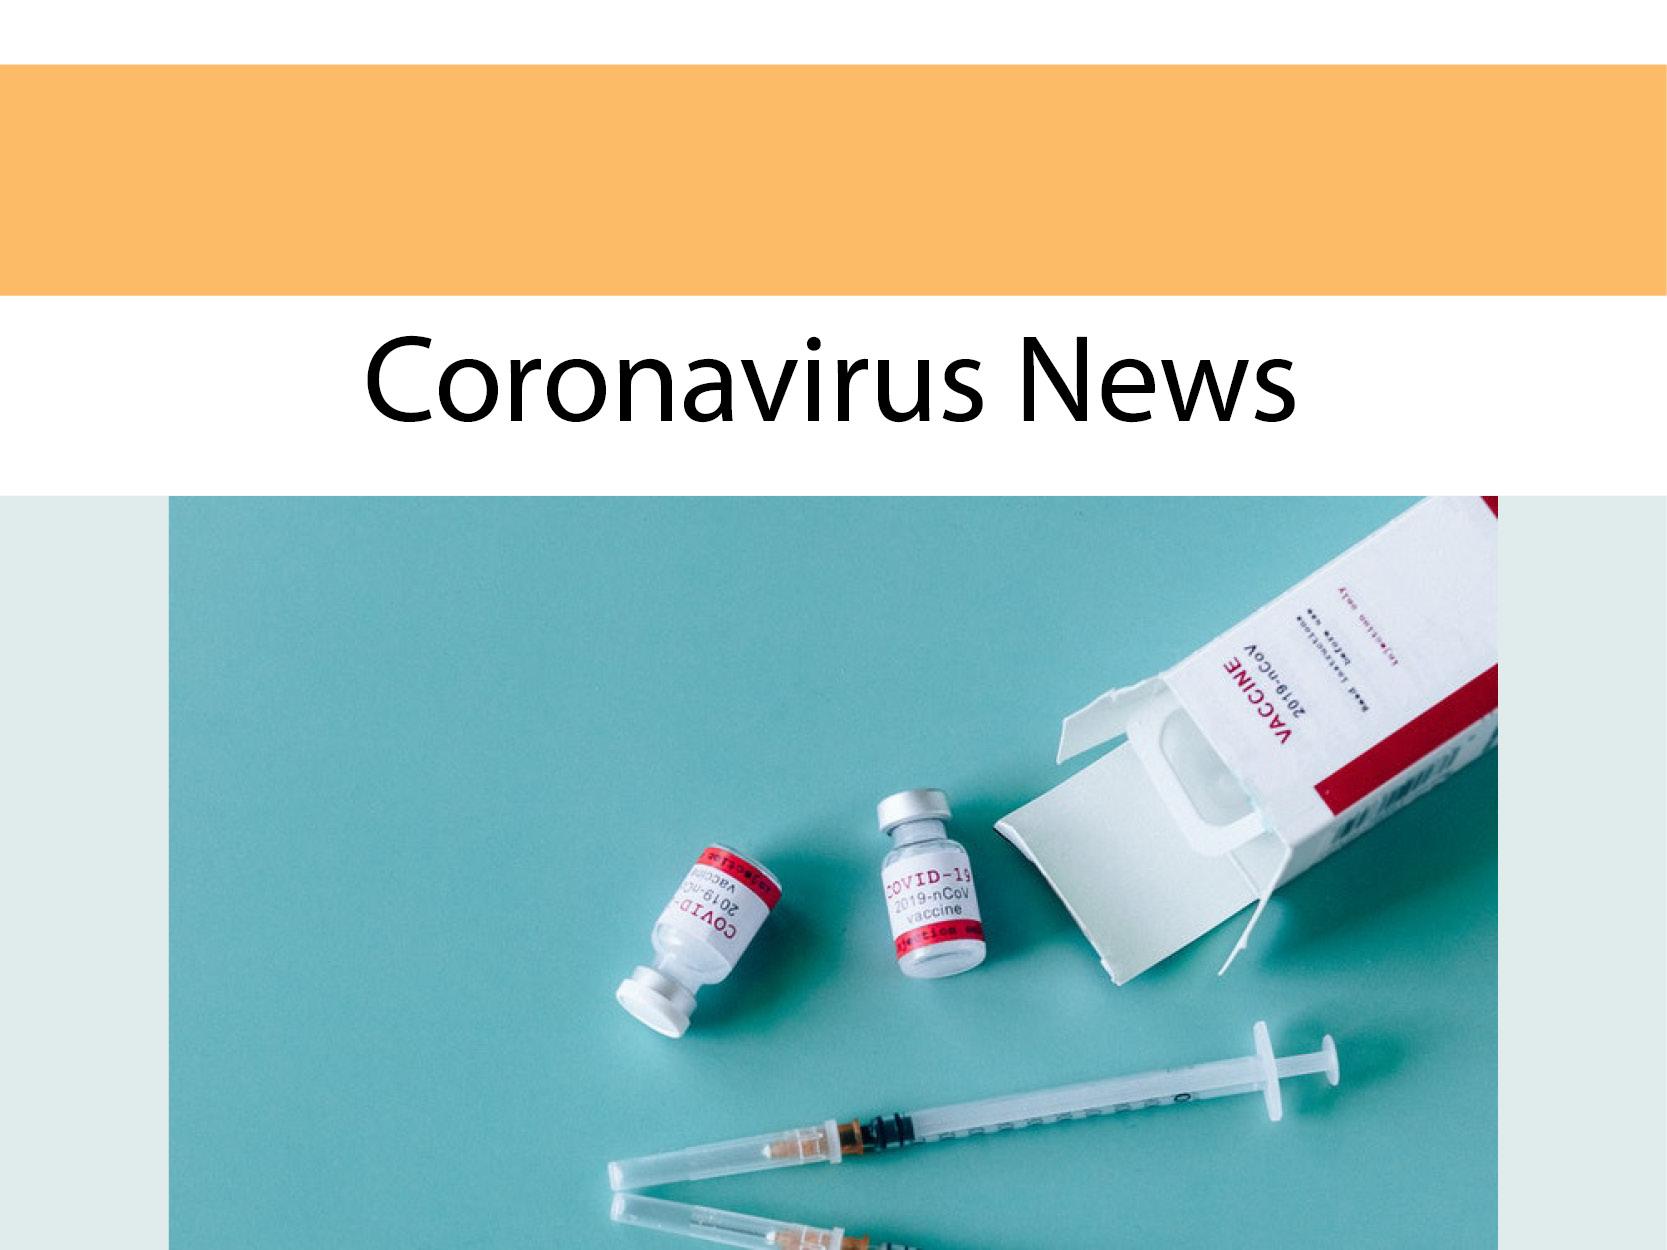 Active COVID-19 cases decrease to 11 in Argenteuil, more than 17,000 people vaccinated across Laurentides region